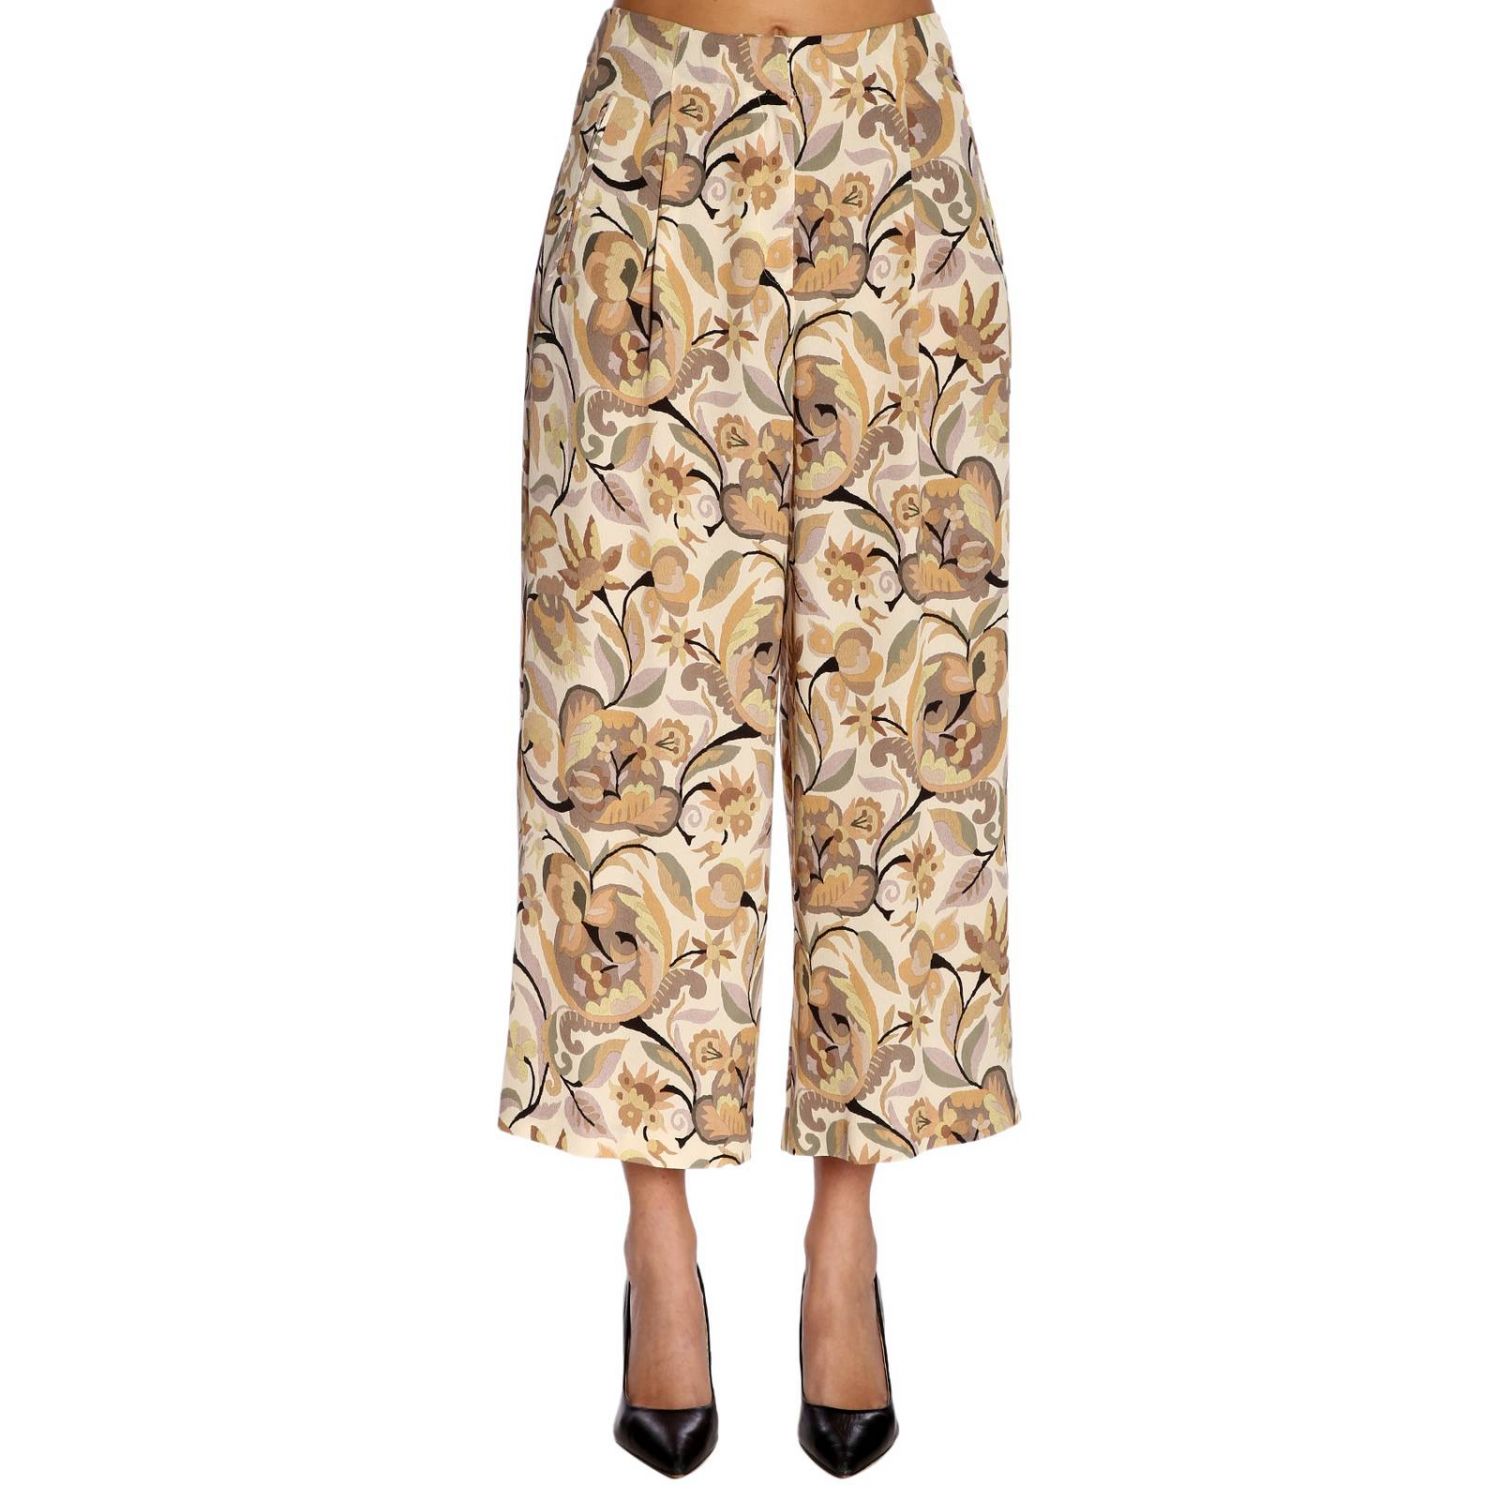 Etro Outlet: pants for woman - Beige | Etro pants 14758 4315 online on ...